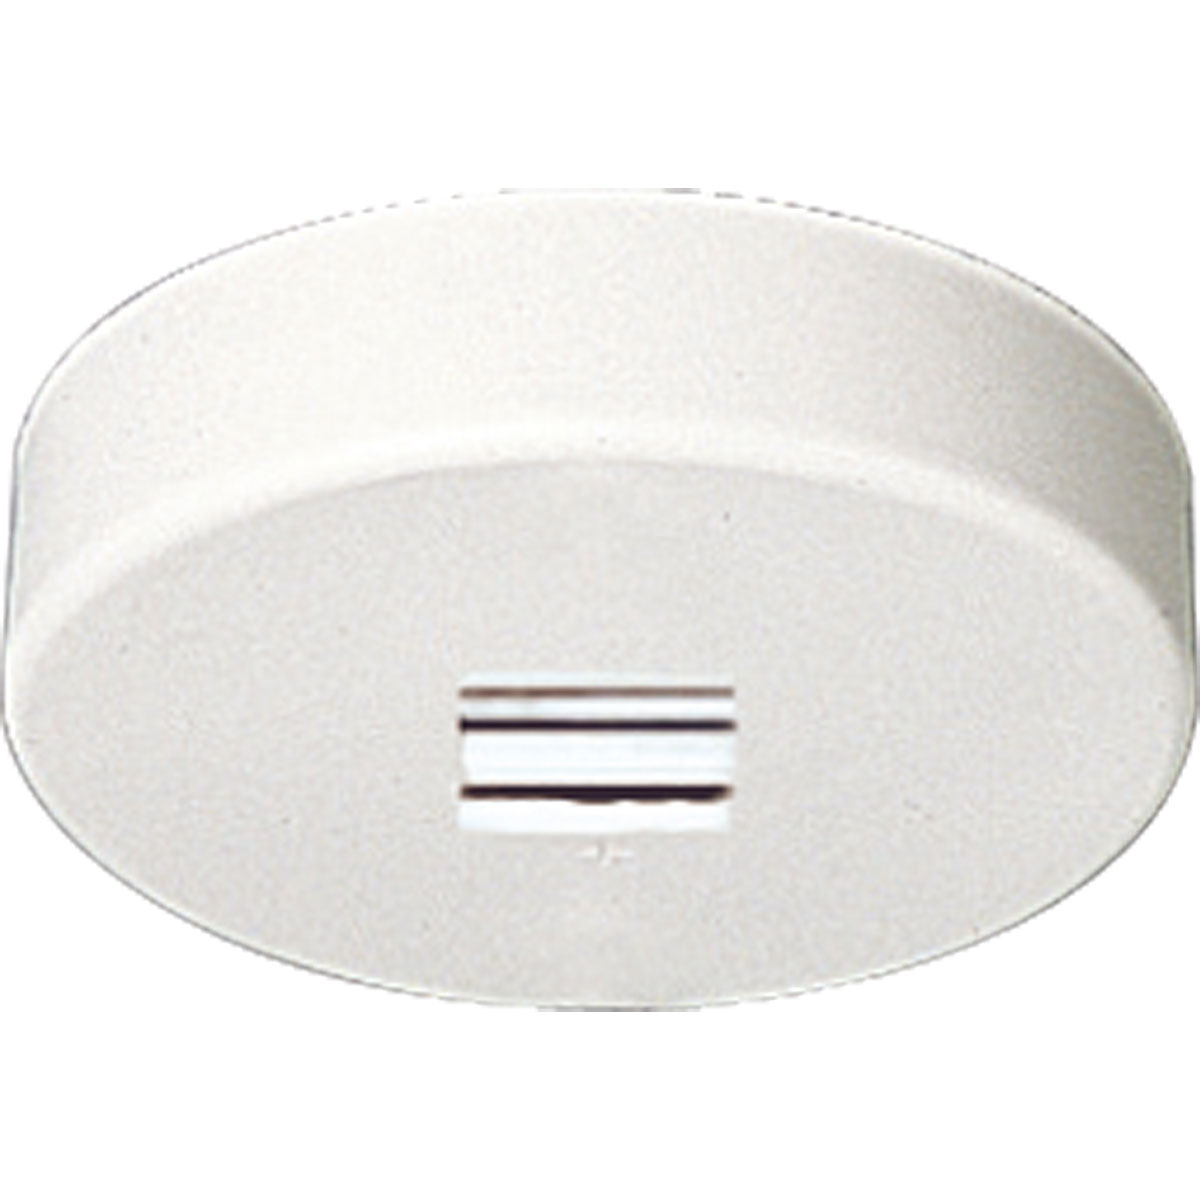 Monopoint. Mounts any lampholder, not requiring an external transformer, to junction box on ceiling or wall. White finish.